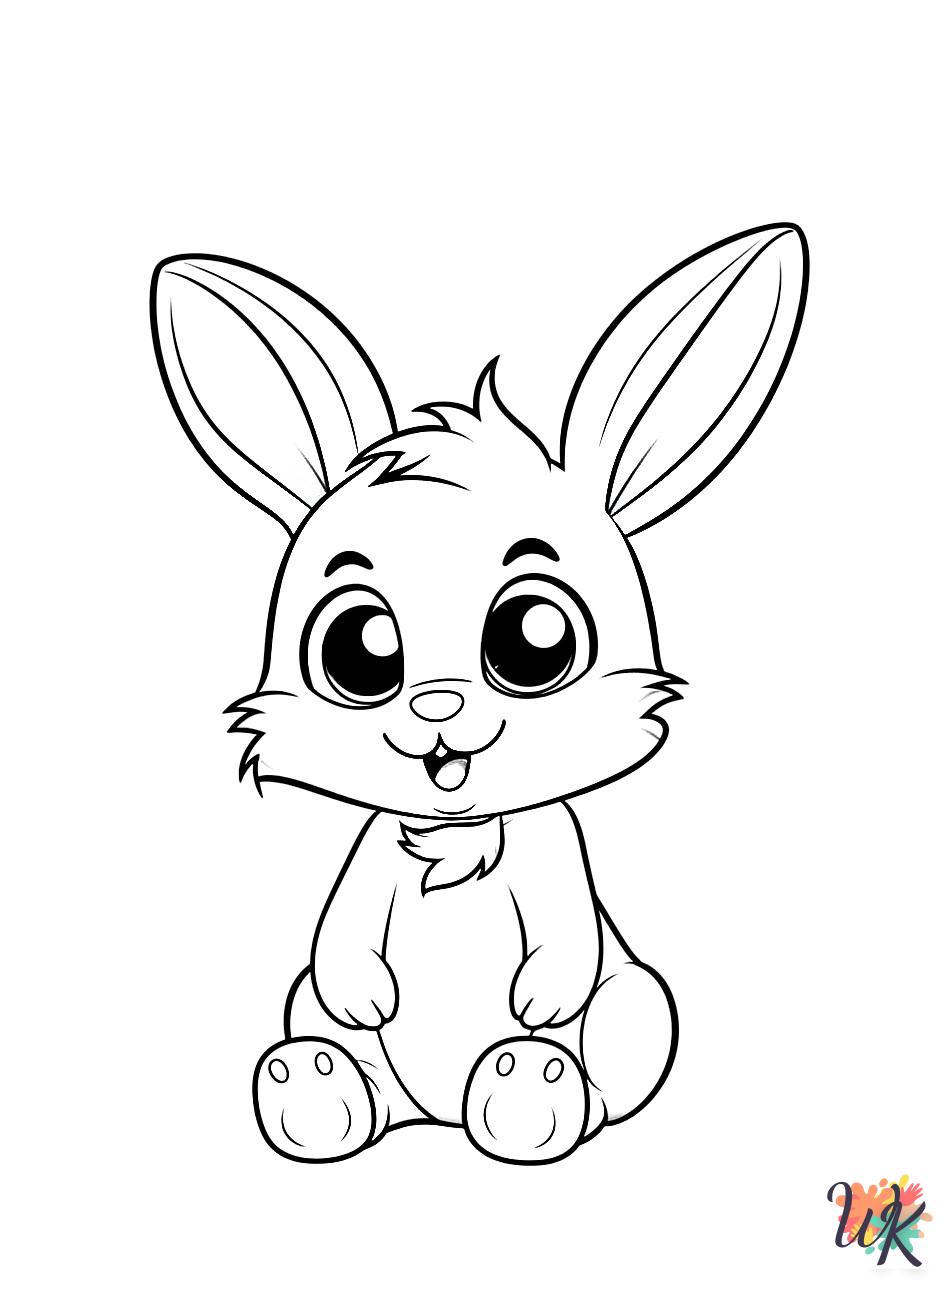 Rabbits free coloring pages 5